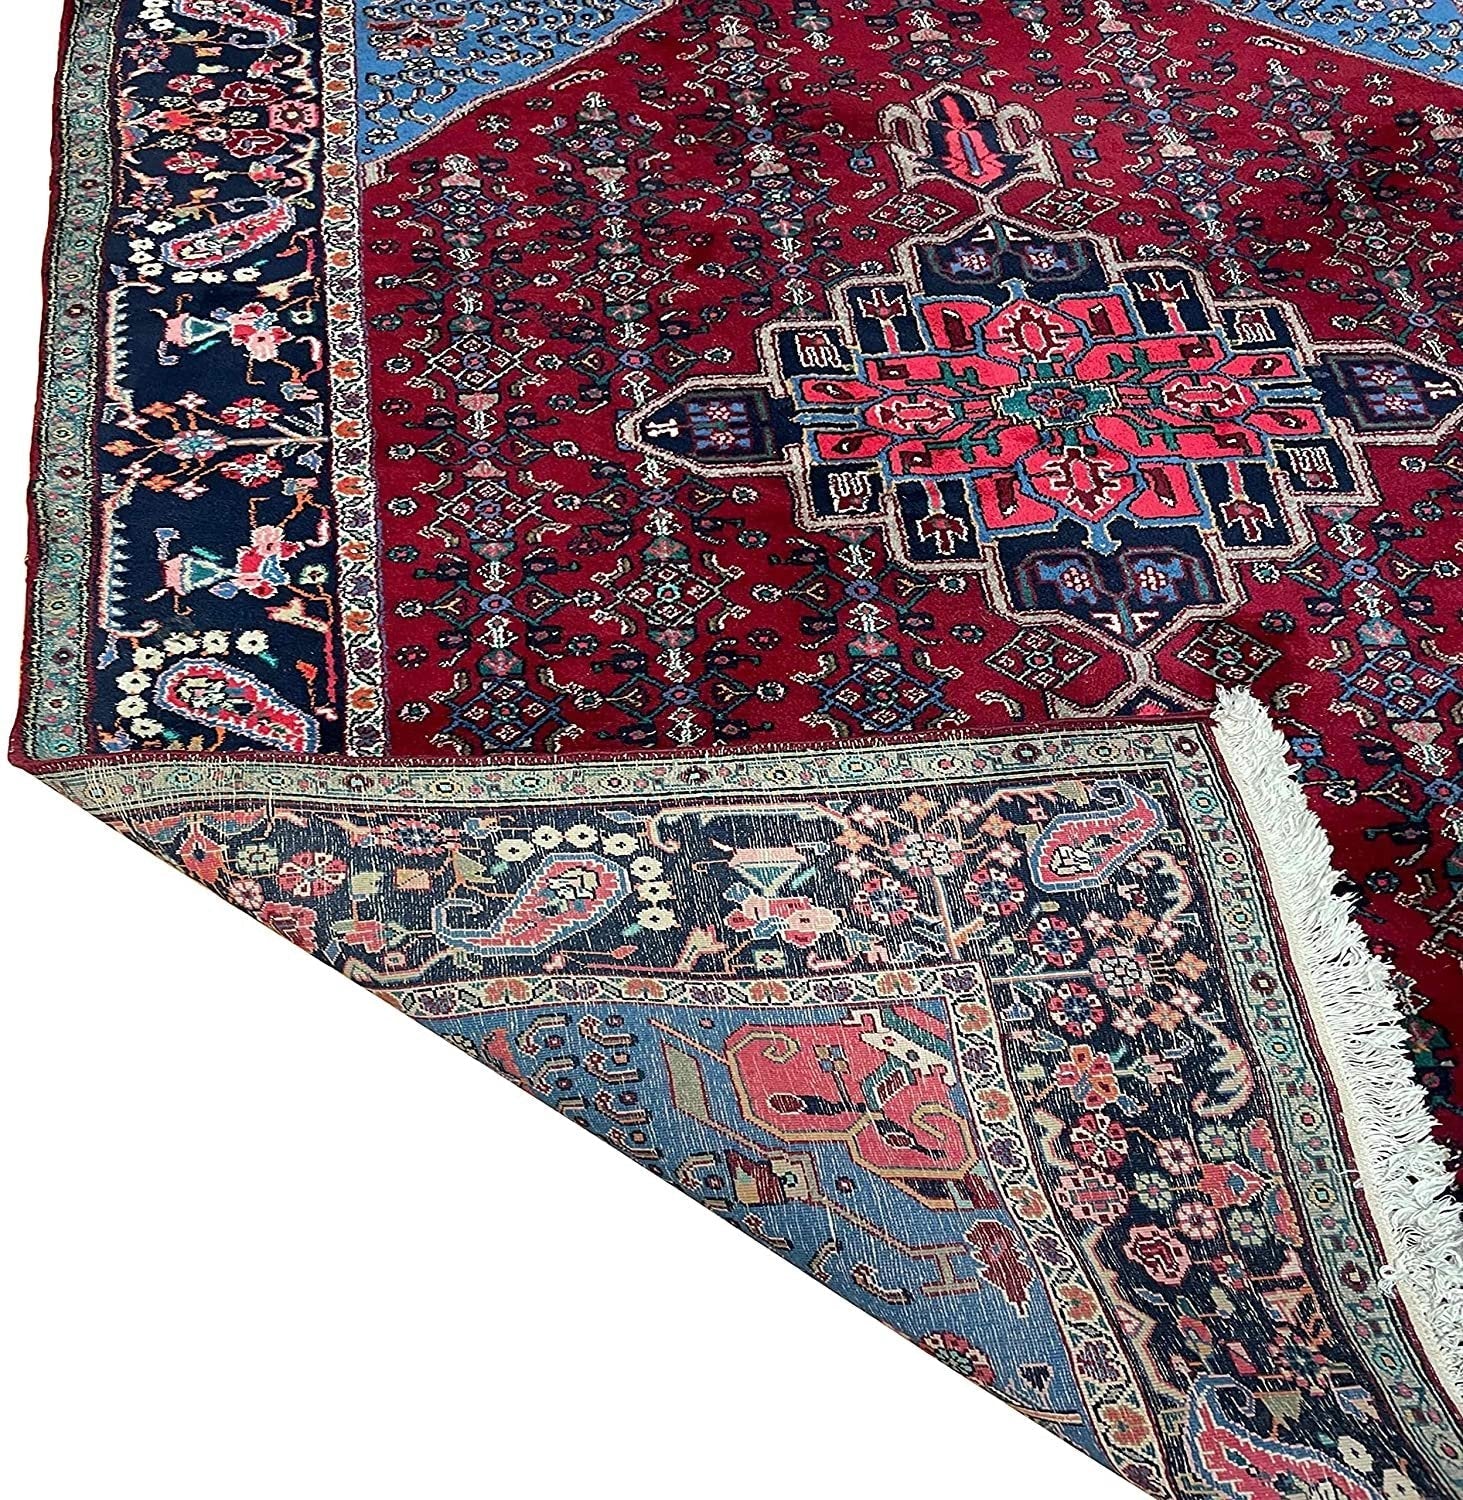 Authentic Handmade fine Turkish Rug-Real Wool Allover Floral Pattern Faded/Vintage-Red/Blue/Multocolor-(6.8" by 10.8")